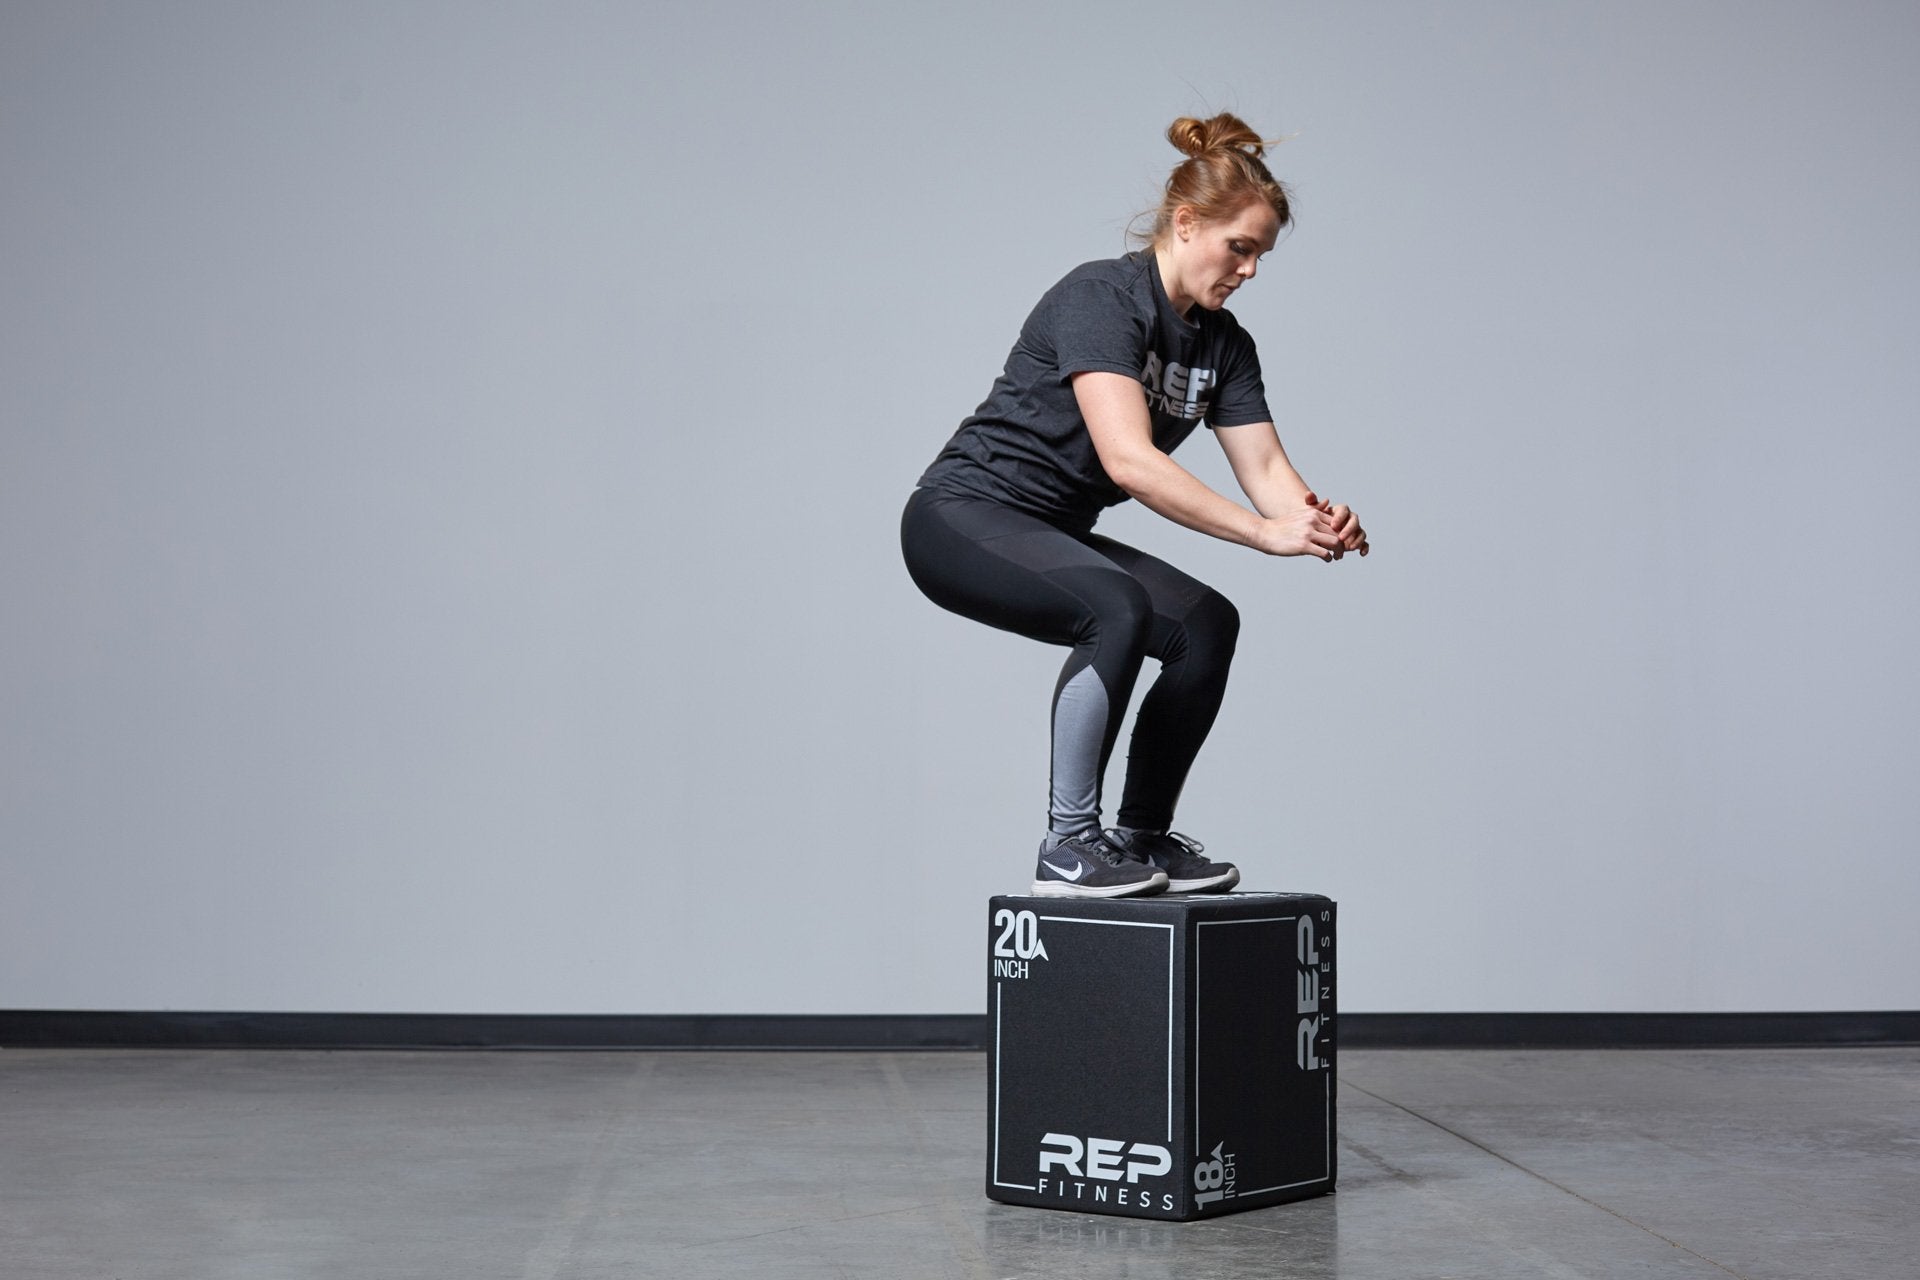 Individual performing box jumps on the Small REP 3-in-1 Soft Plyo Box.